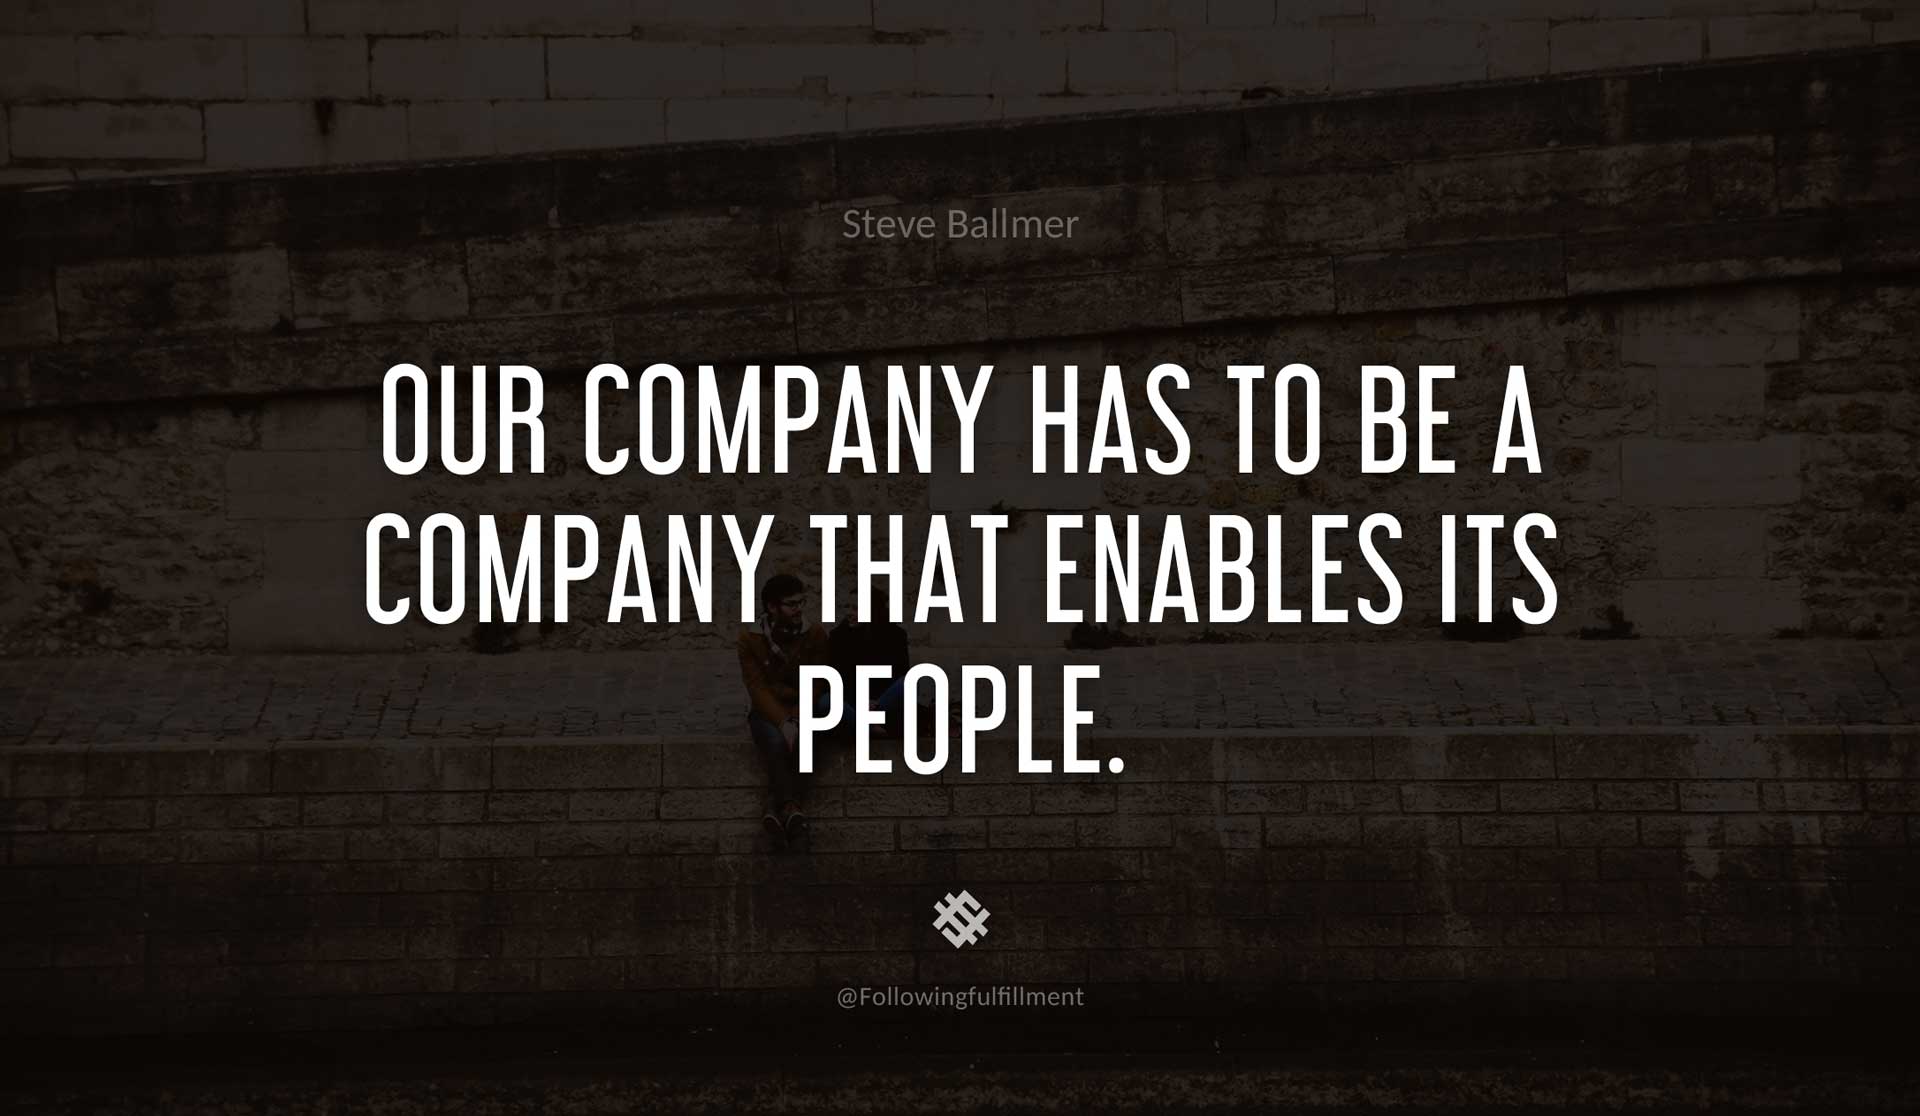 Our-company-has-to-be-a-company-that-enables-its-people.-STEVE-BALLMER-Quote.jpg